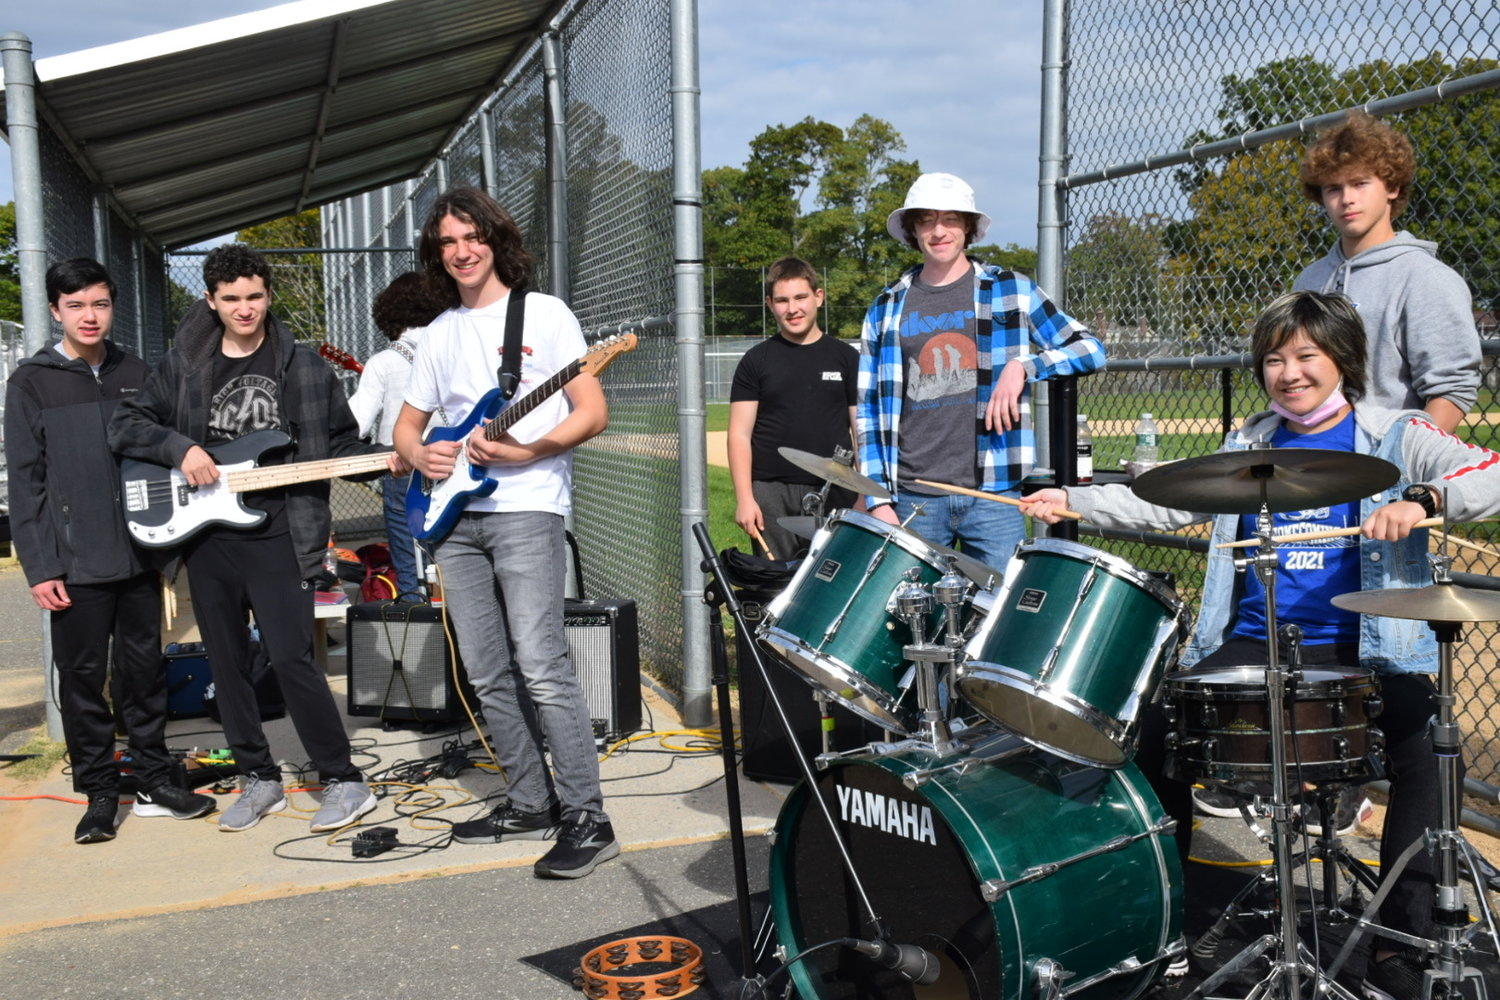 The Calhoun Rock Band, directed by Ed Tumminelli, provided musical entertainment for the homecoming game.